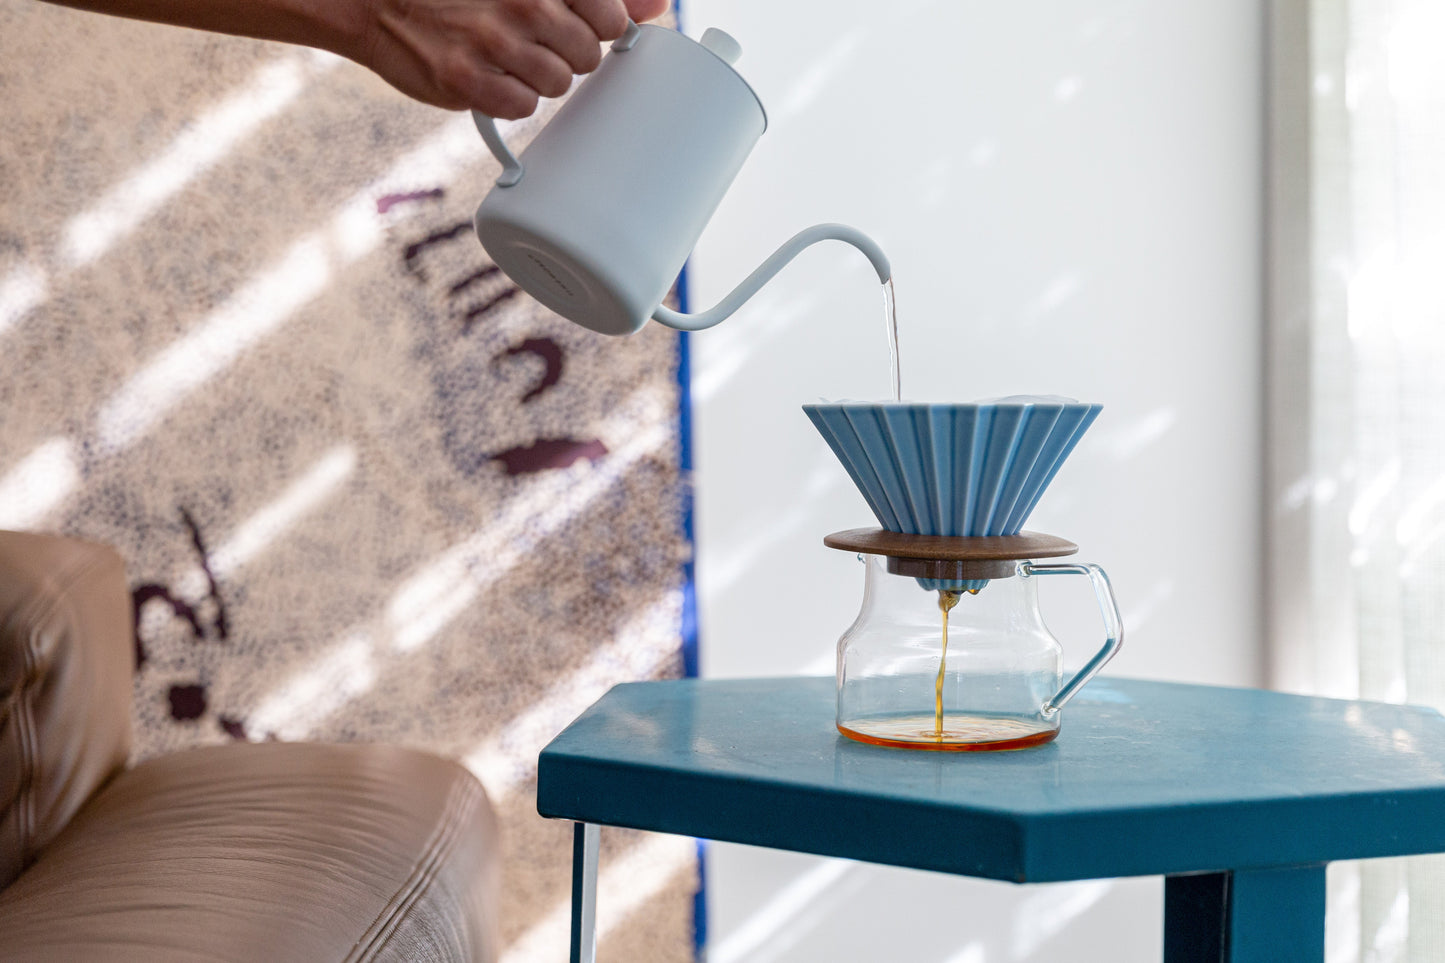 A blue ORIGAMI coffee dripper brewing coffee at home